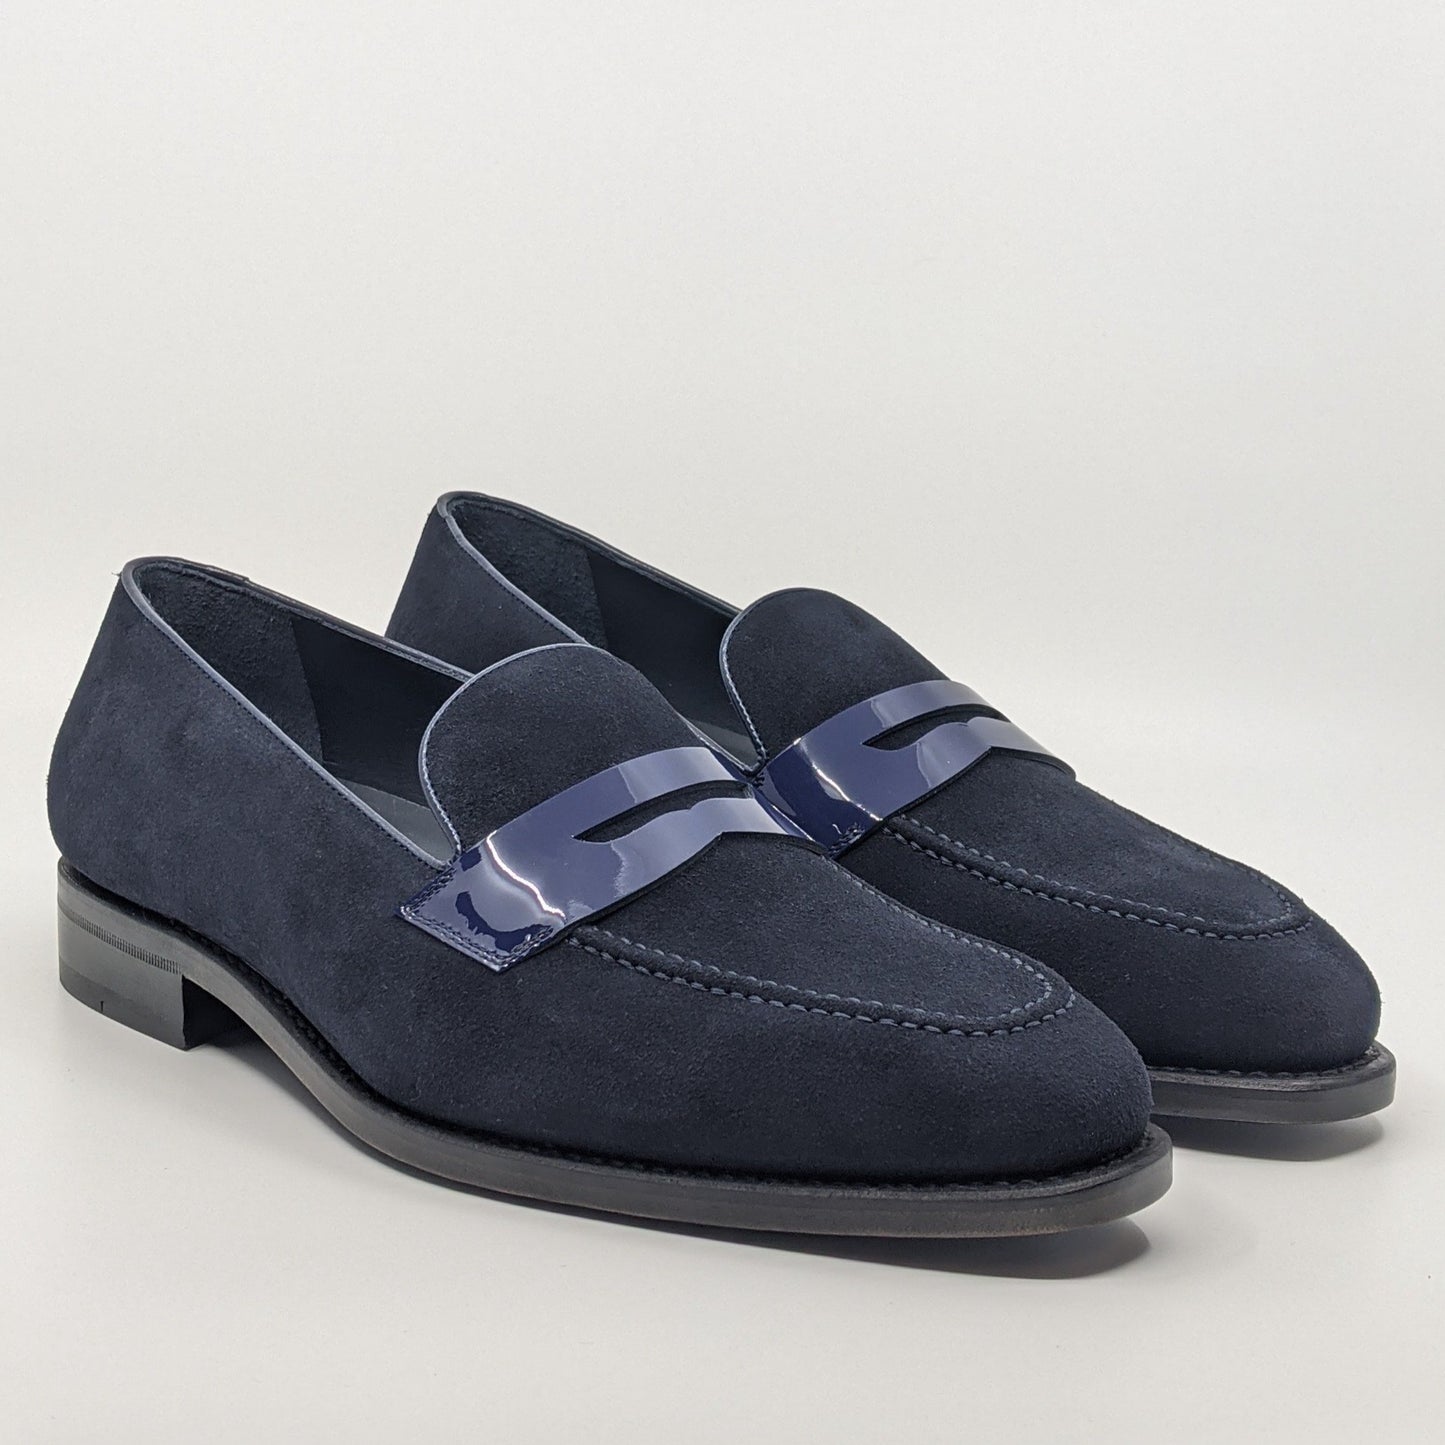 suitor blue with Goodyear Welt Construction shoe 